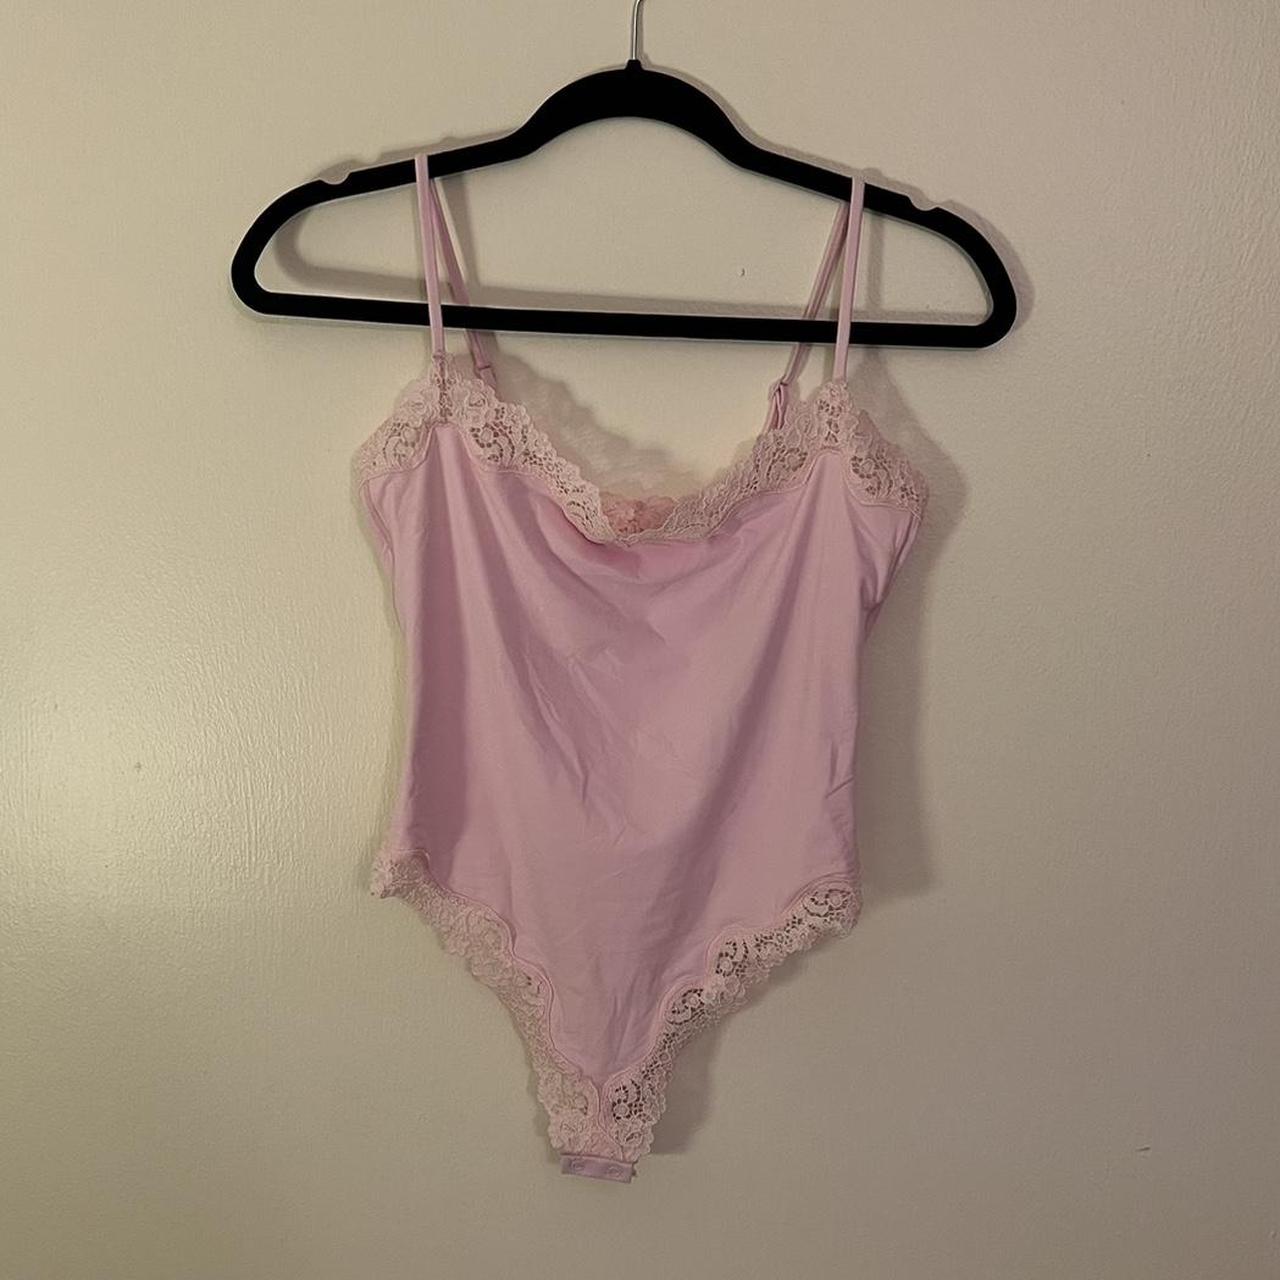 Skims Women's Pink Petal Fits Everybody Lace Cami Bodysuit Size XL NWT